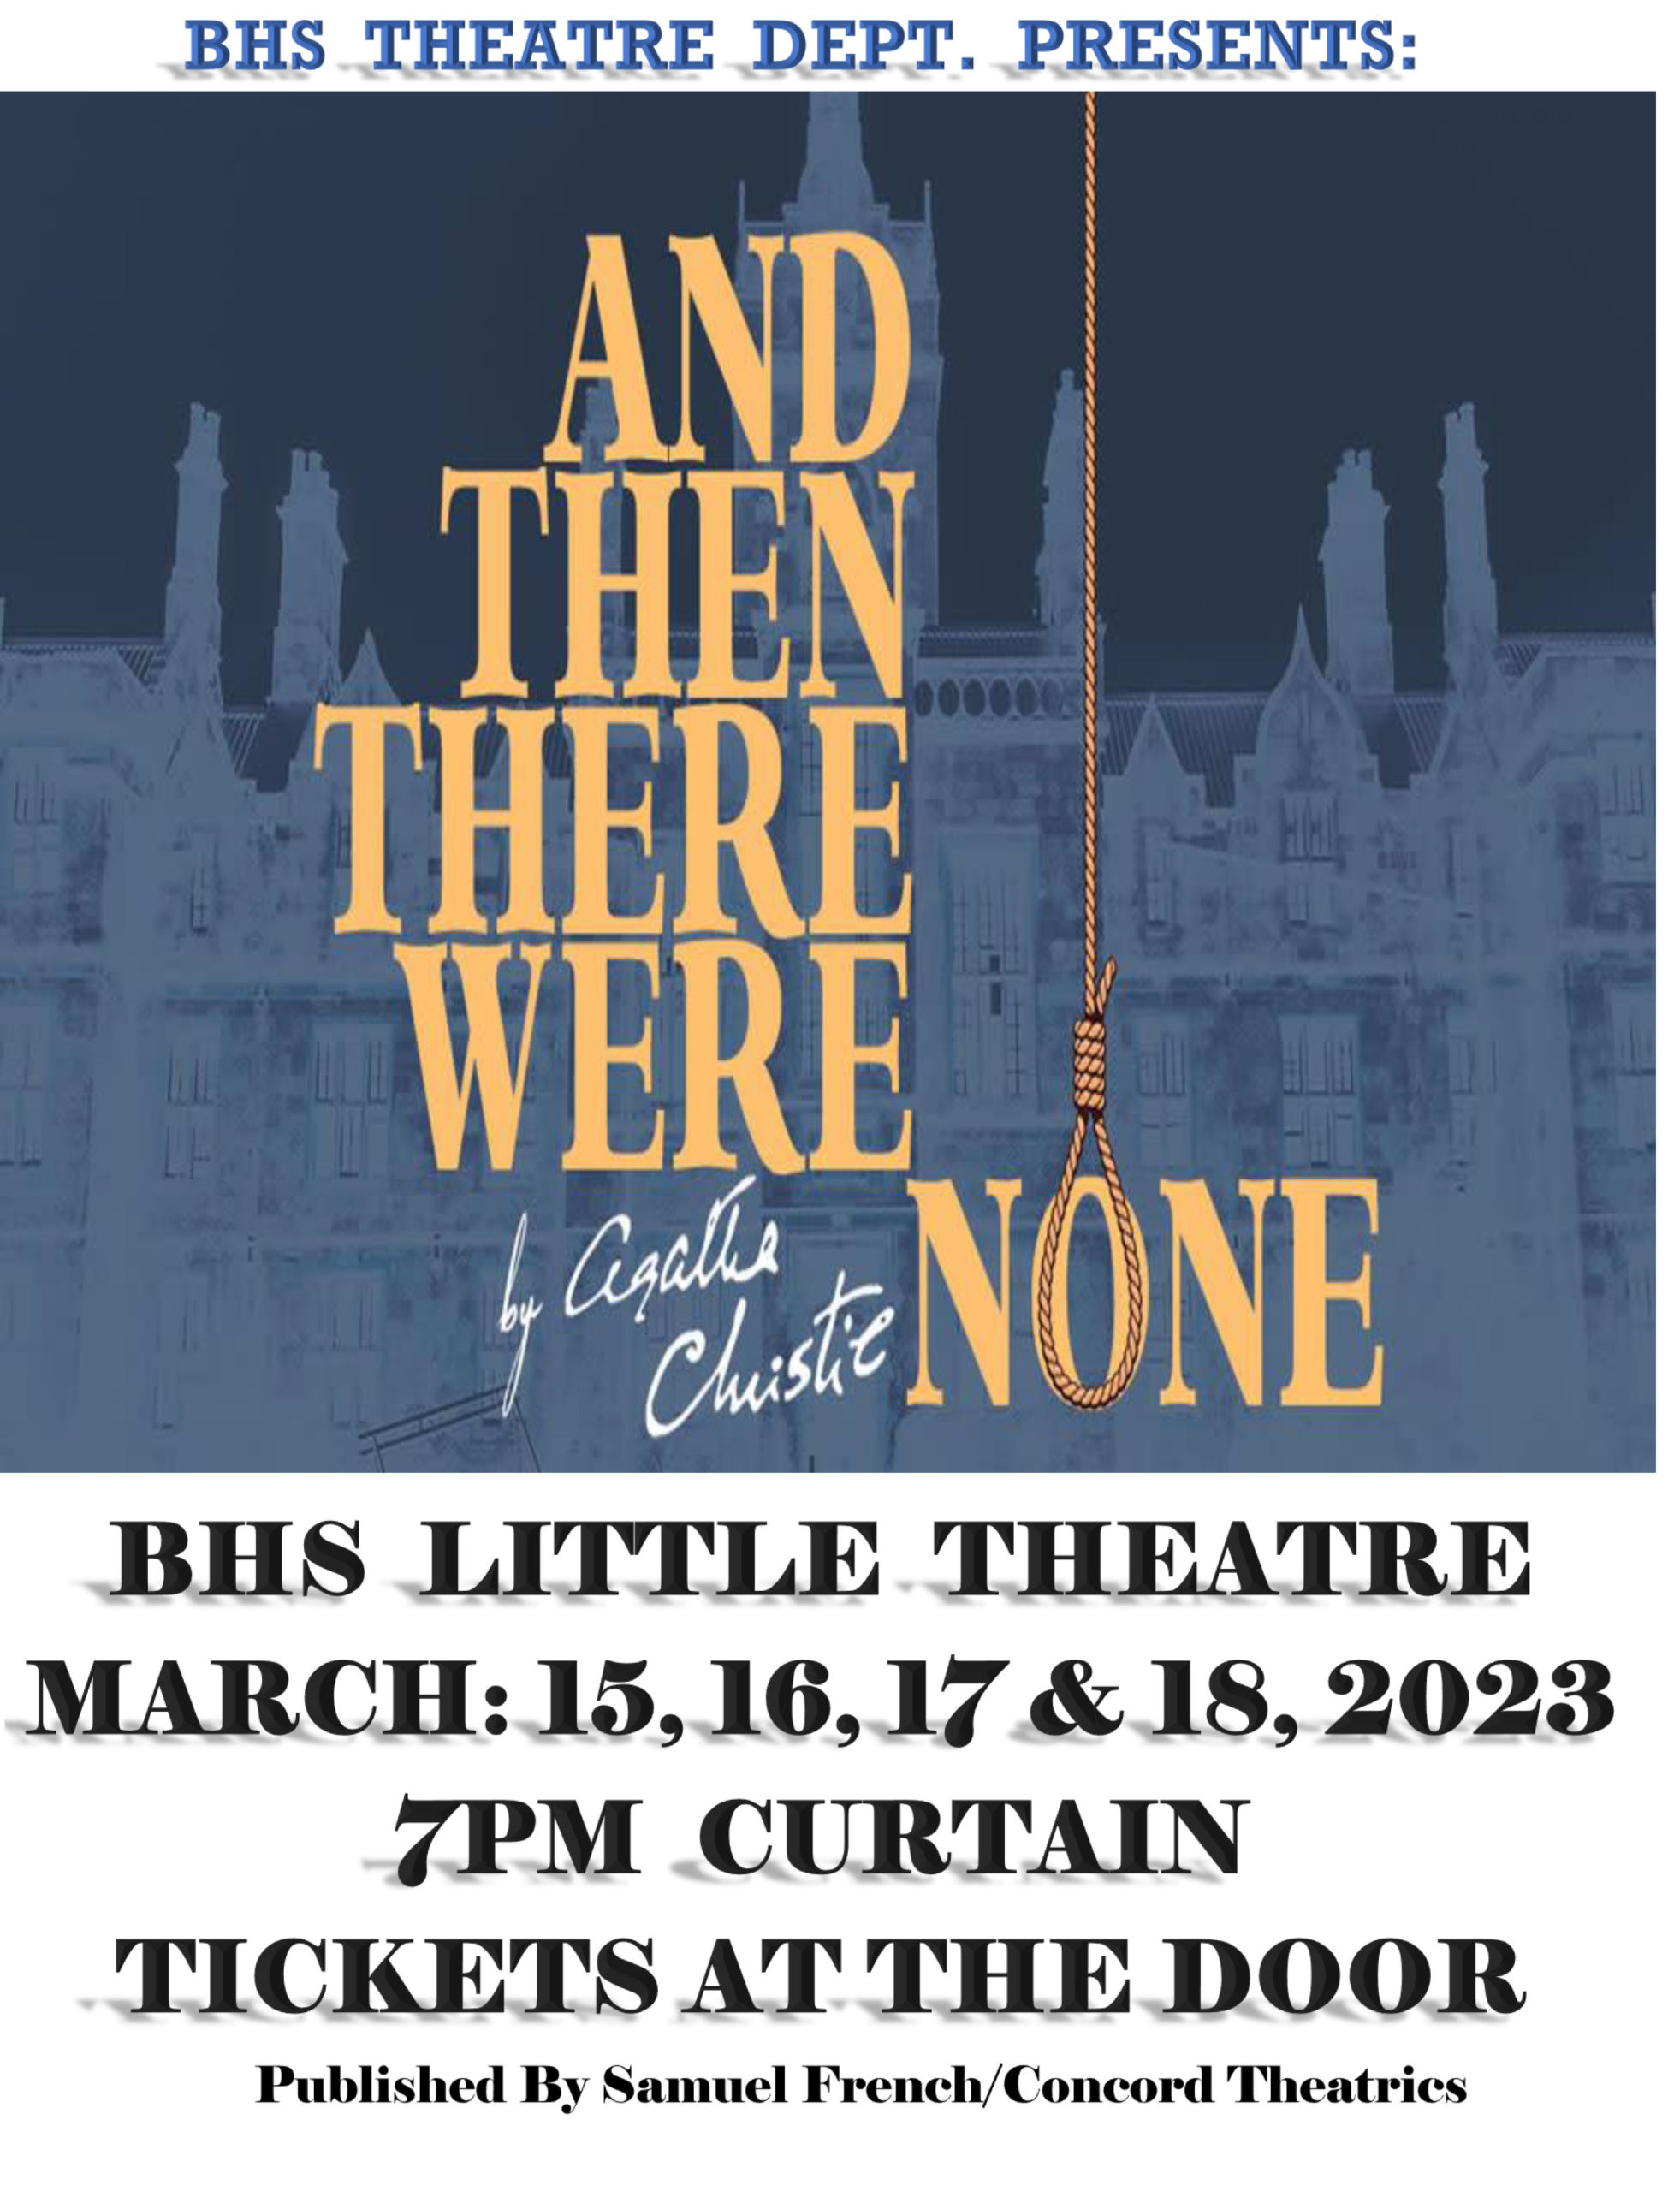 BHS Theatre Dept. Presents: And Then There Were None by Agatha Christie. BHS Little Theatre. March 15, 16, 17, & 18, 2023. 7pm Curtain. Tickets at the Door. Published by Samuel French/Concord Theatrics.